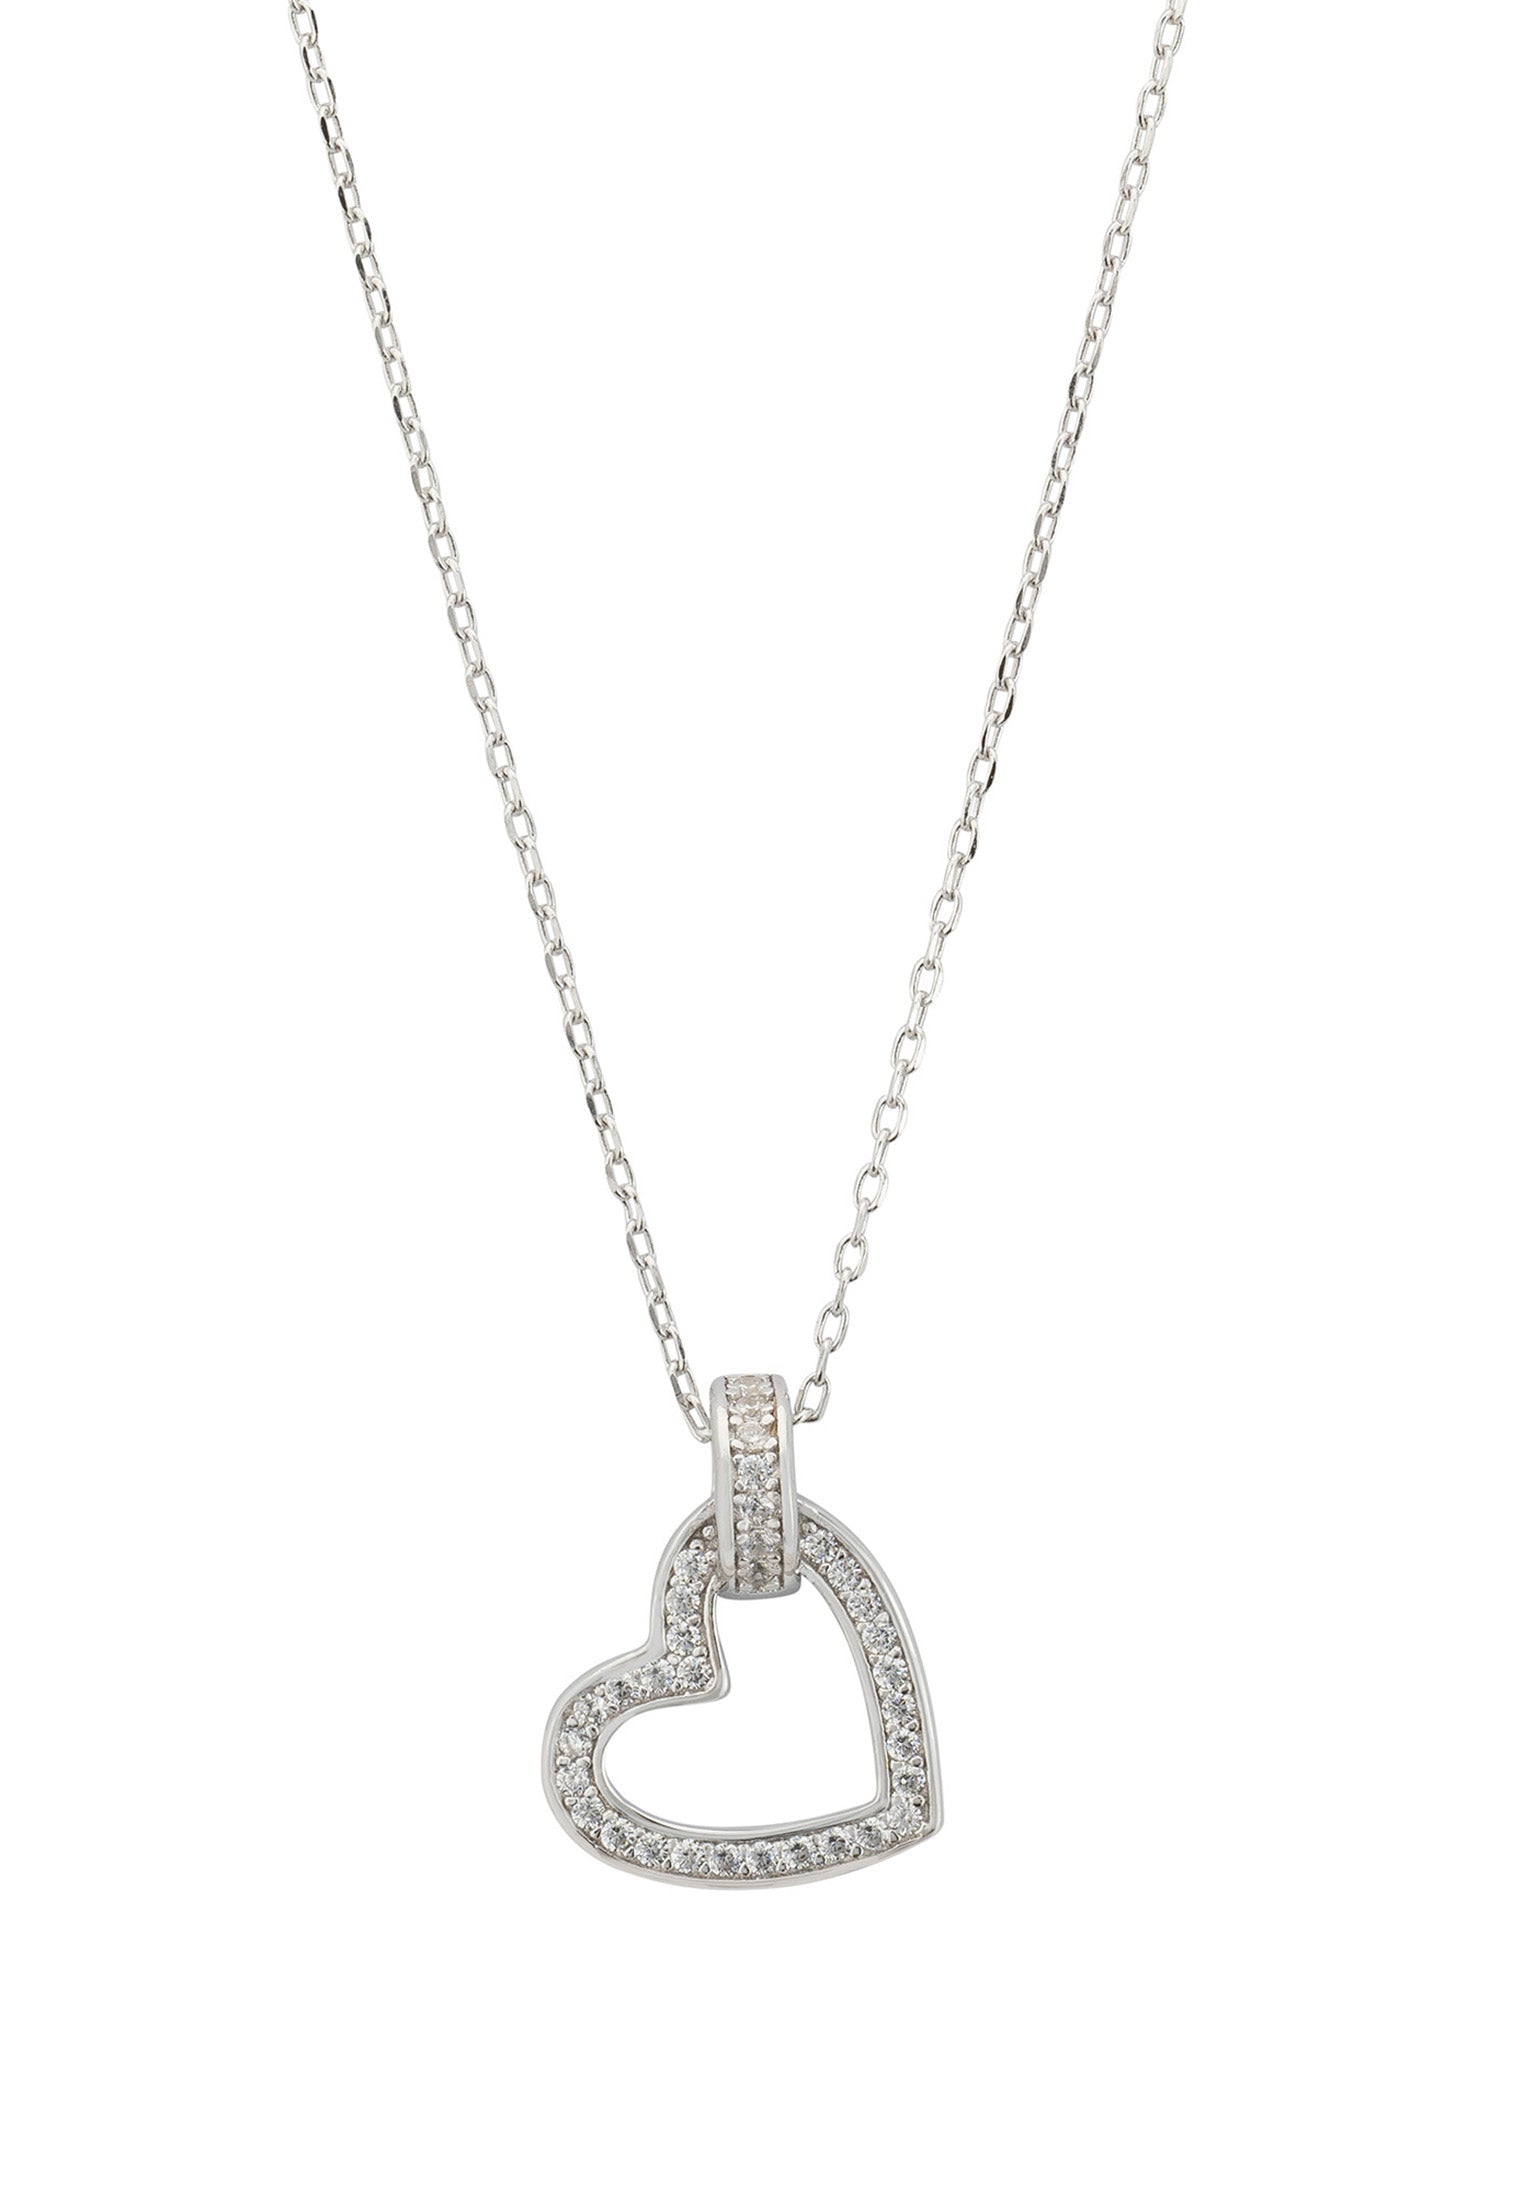 Cherished Heart Pendant Necklace Silver